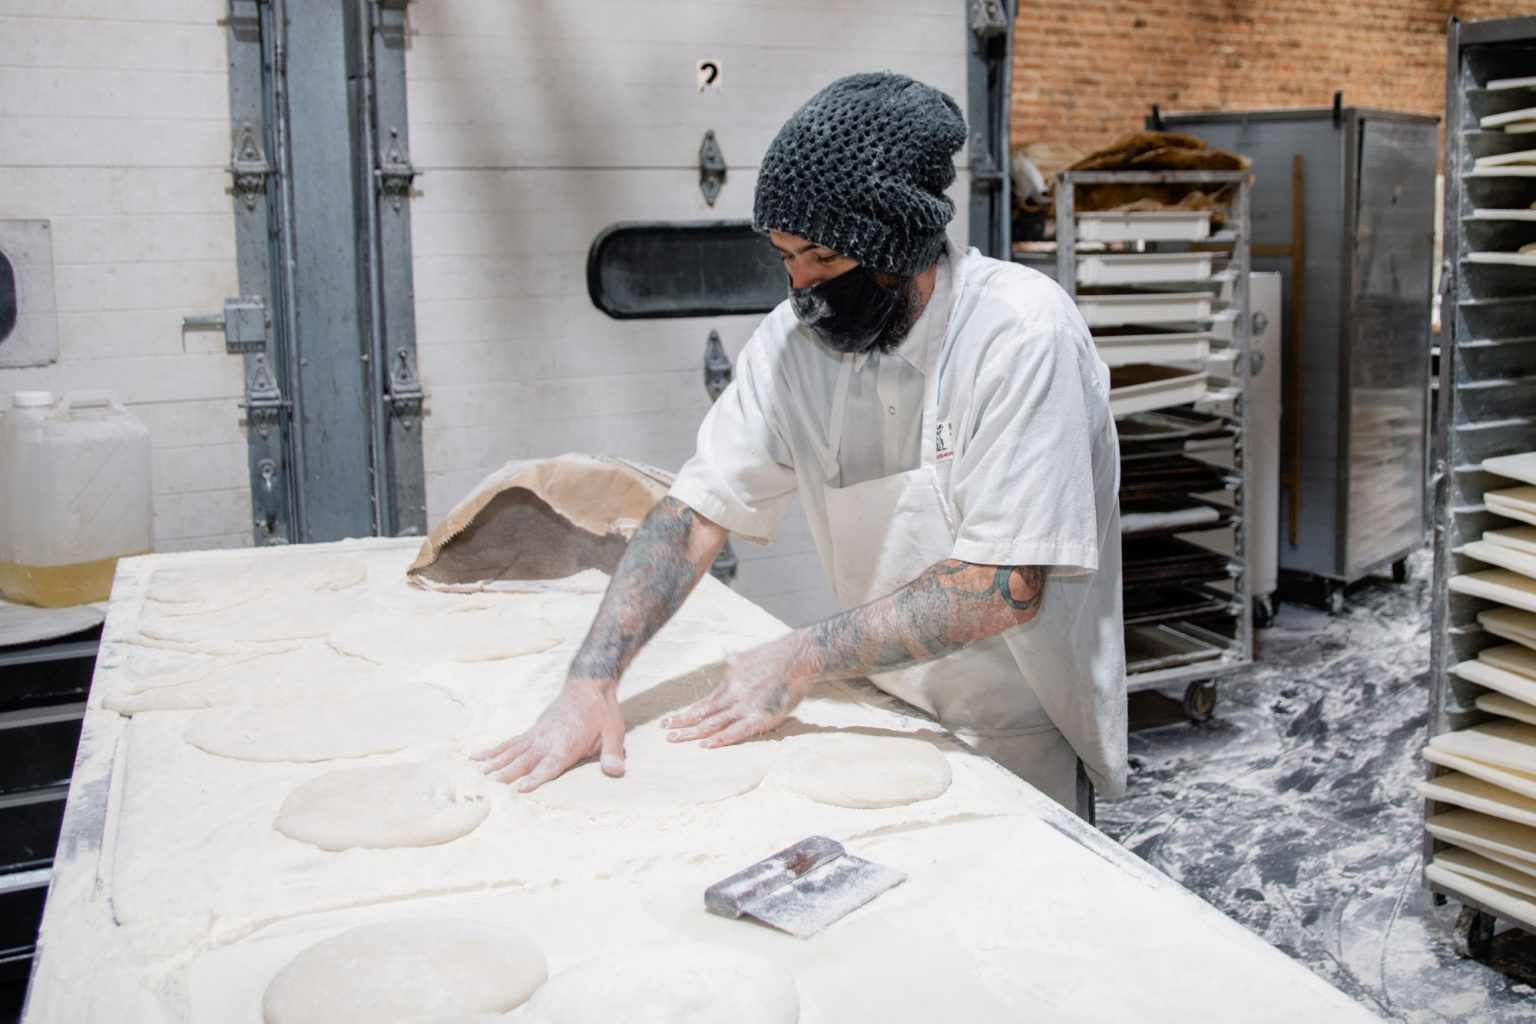 A person pressing against mounds of dough.